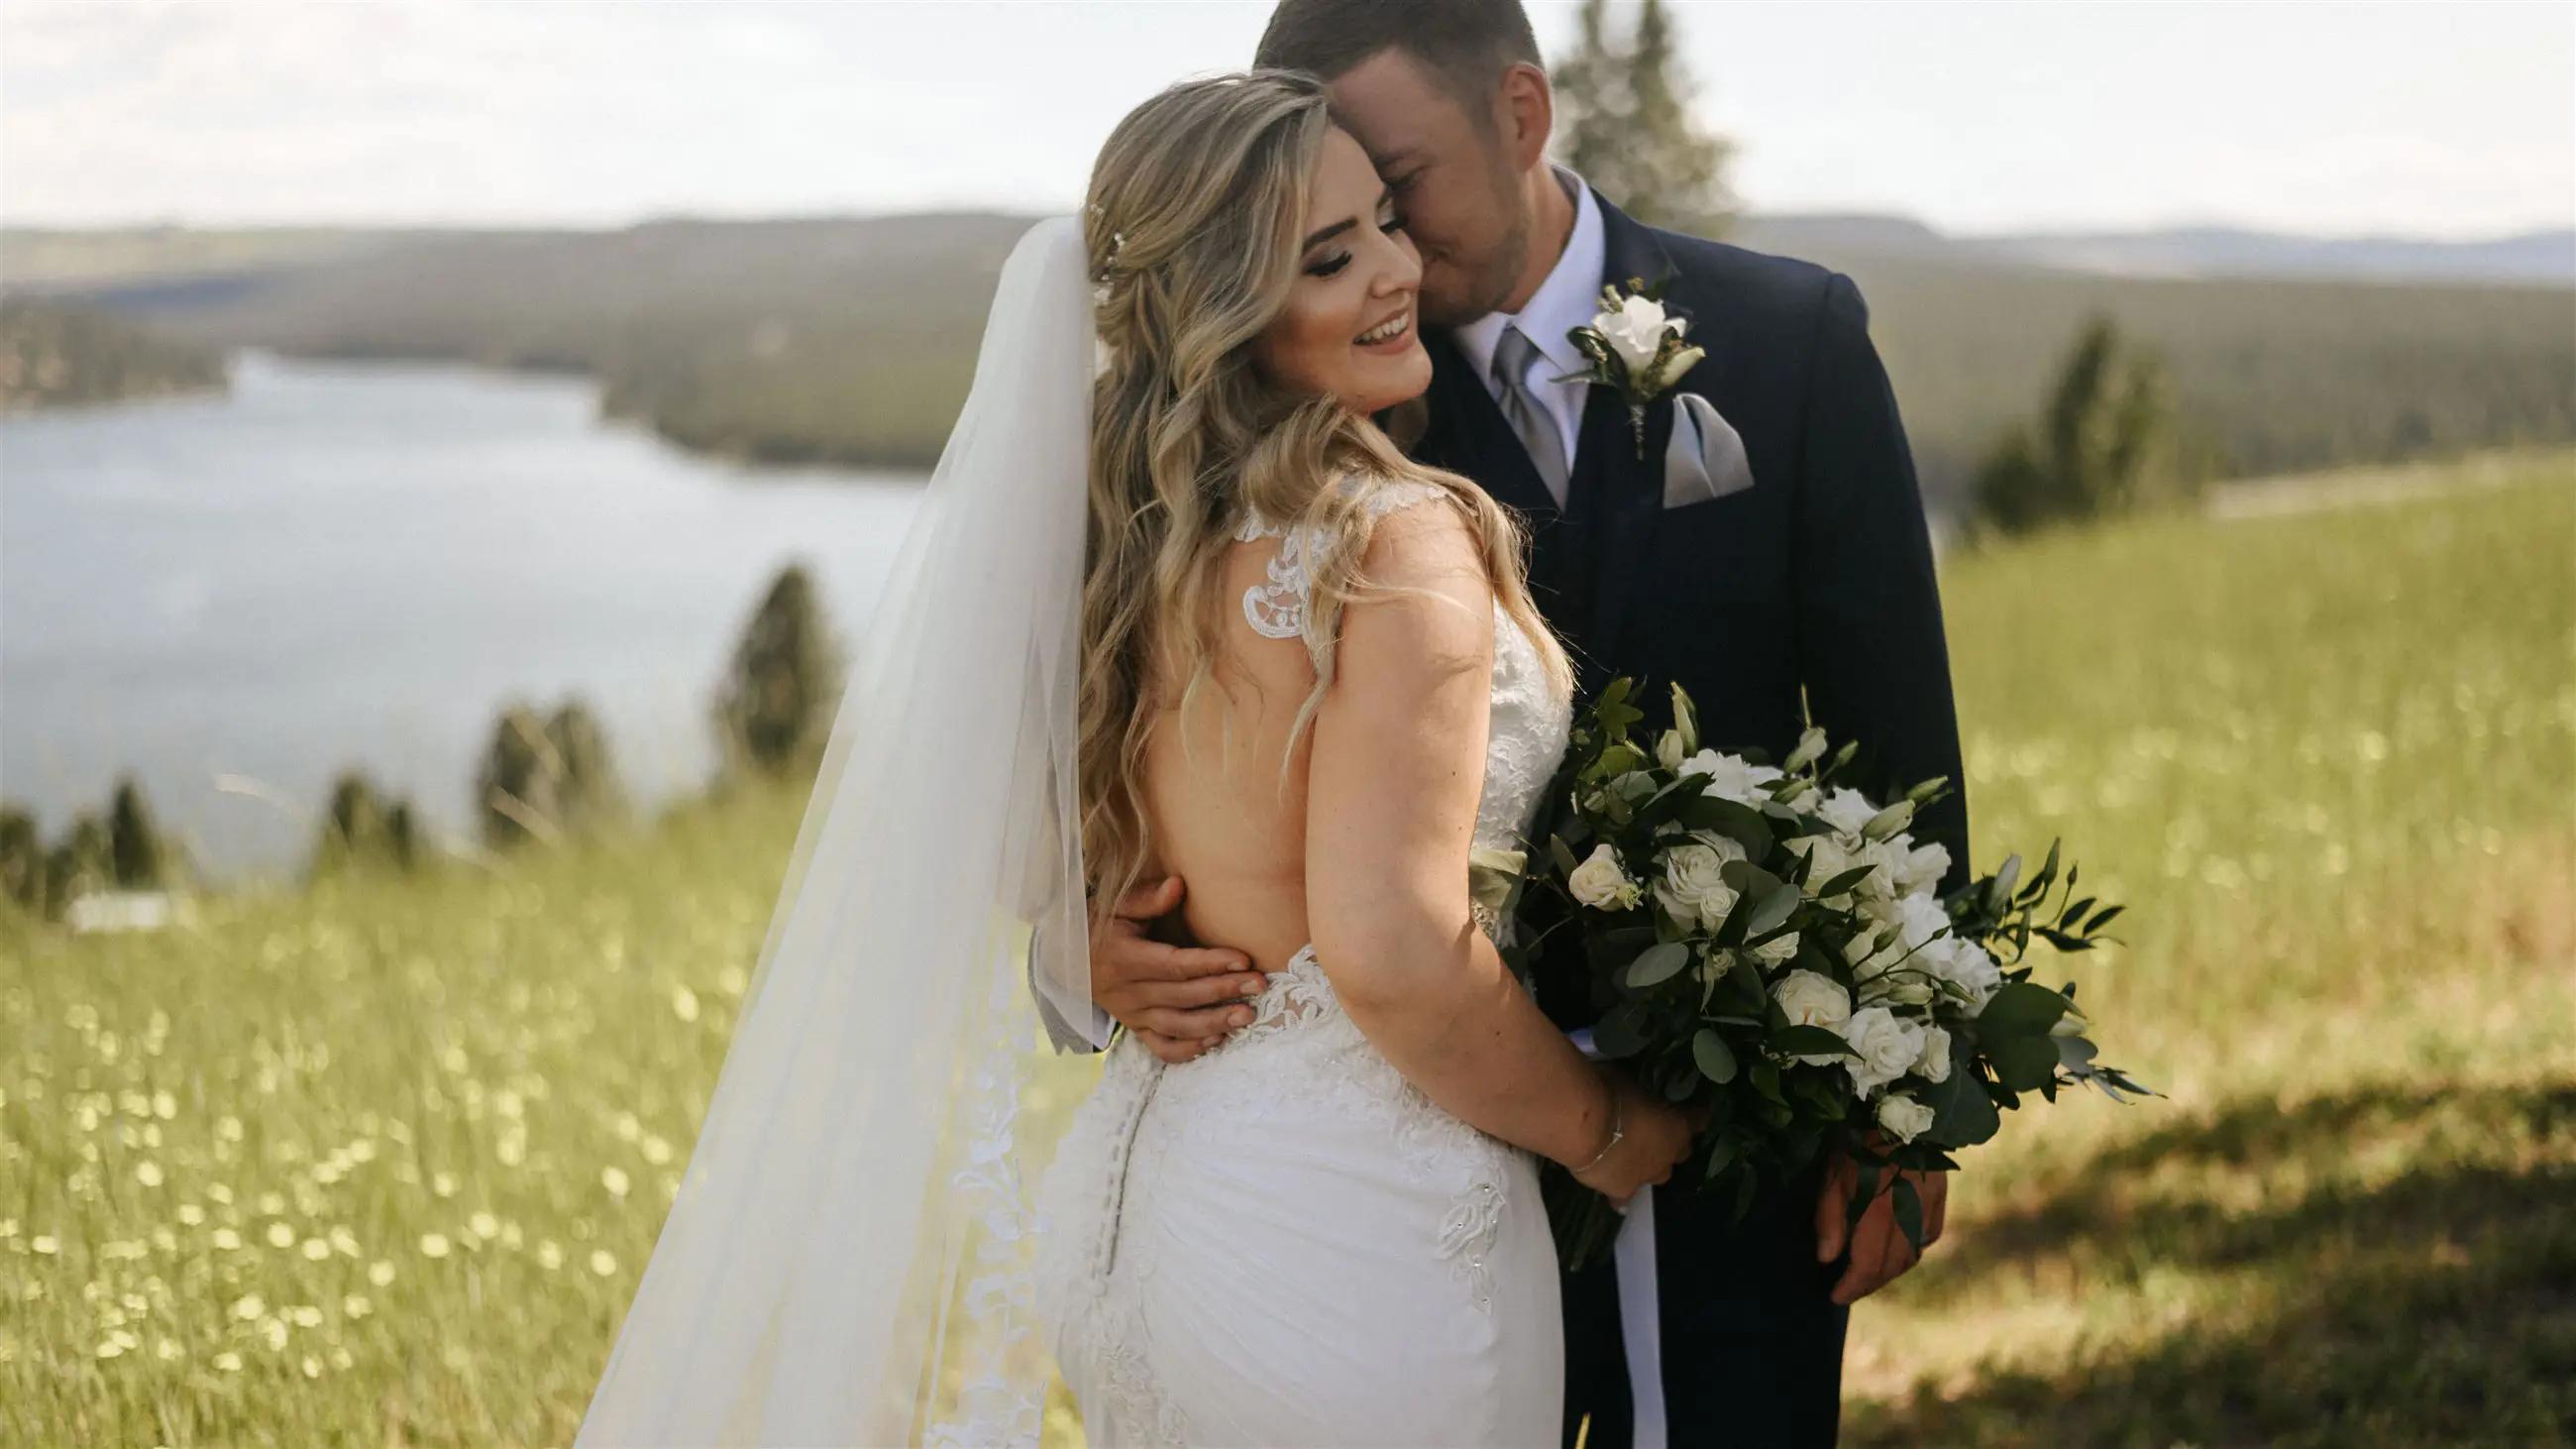 An Intimate Vineyard Wedding Under the Stars Mobile Image